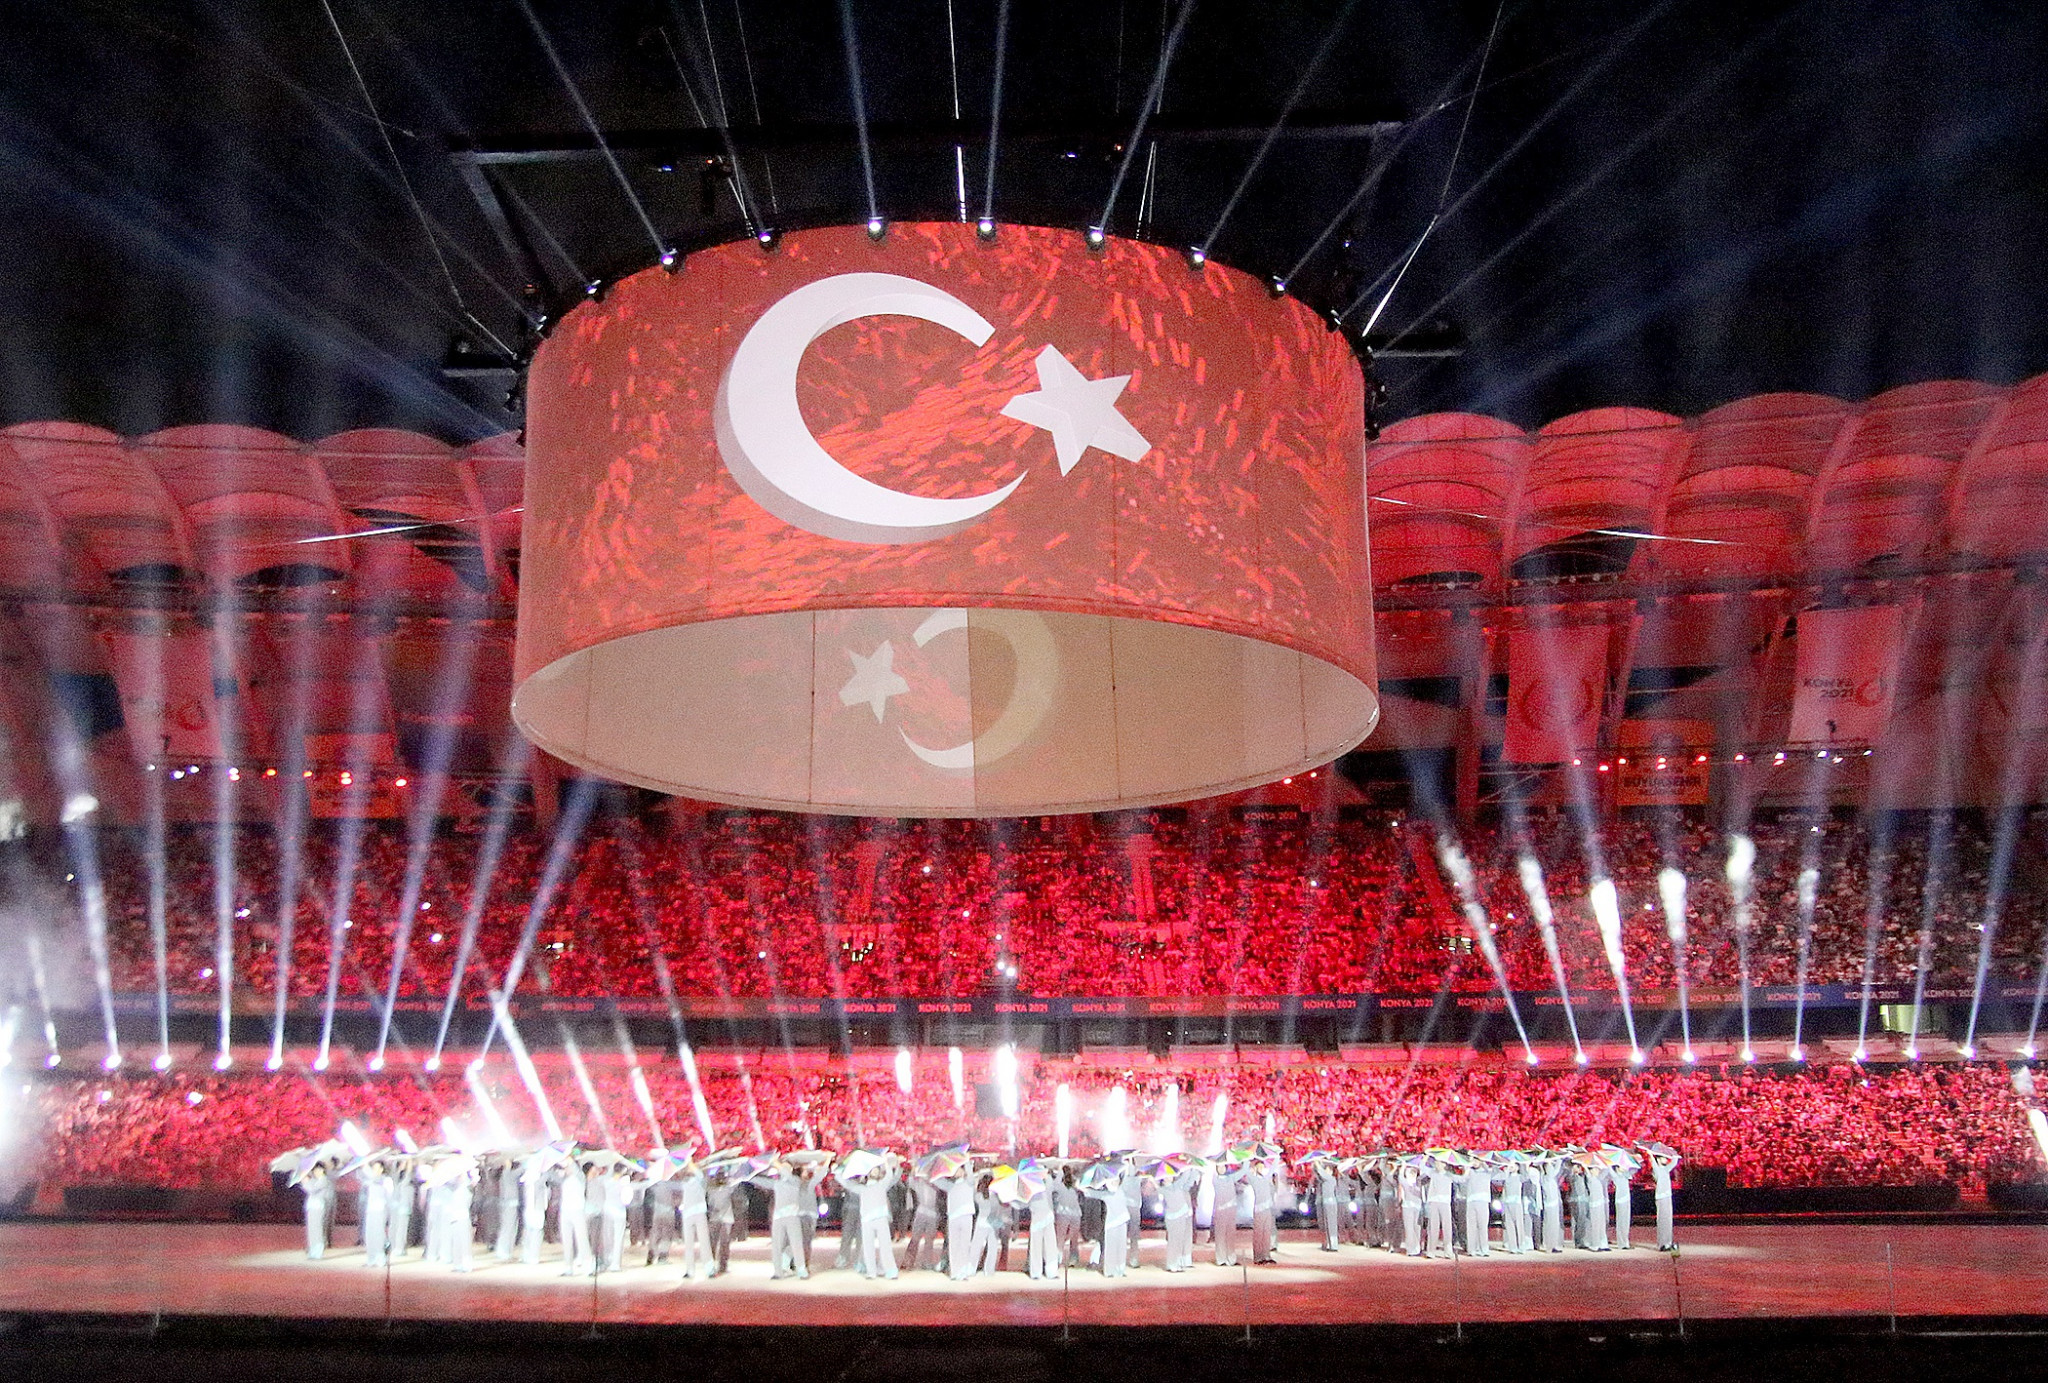 Turkey is staging the Islamic Solidarity Games for the first time ©Konya 2021